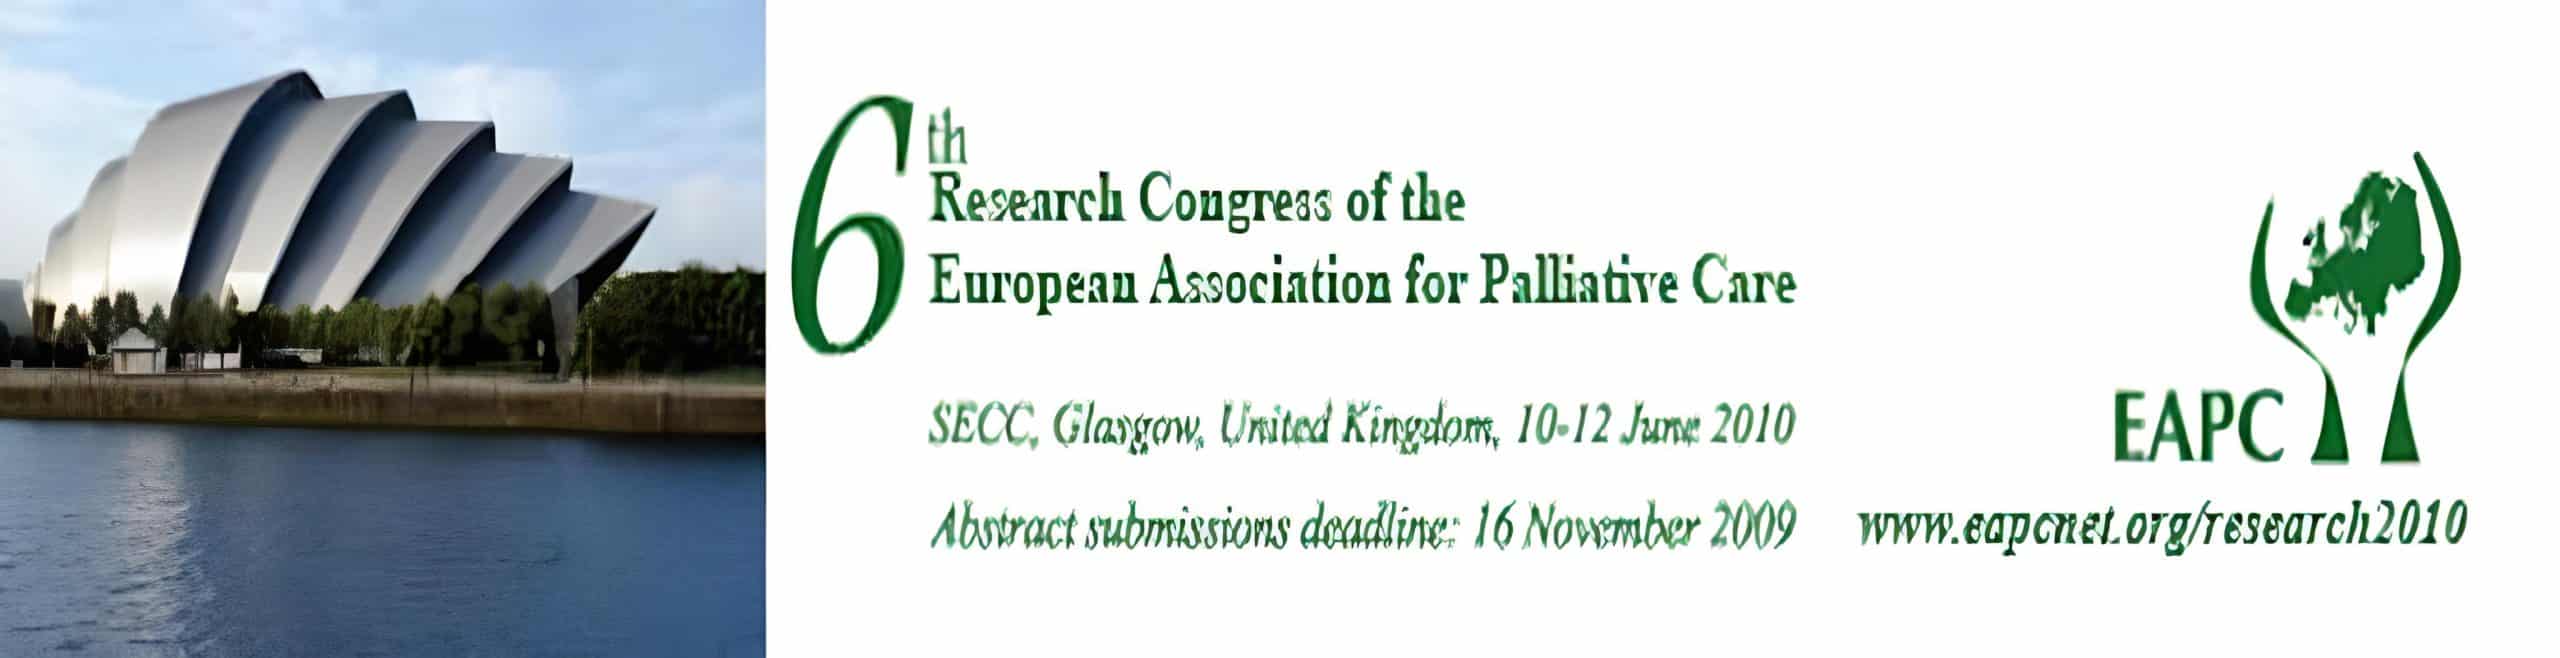 banner 6th research congress of the EAPC Glasgow 10-12 June 2009